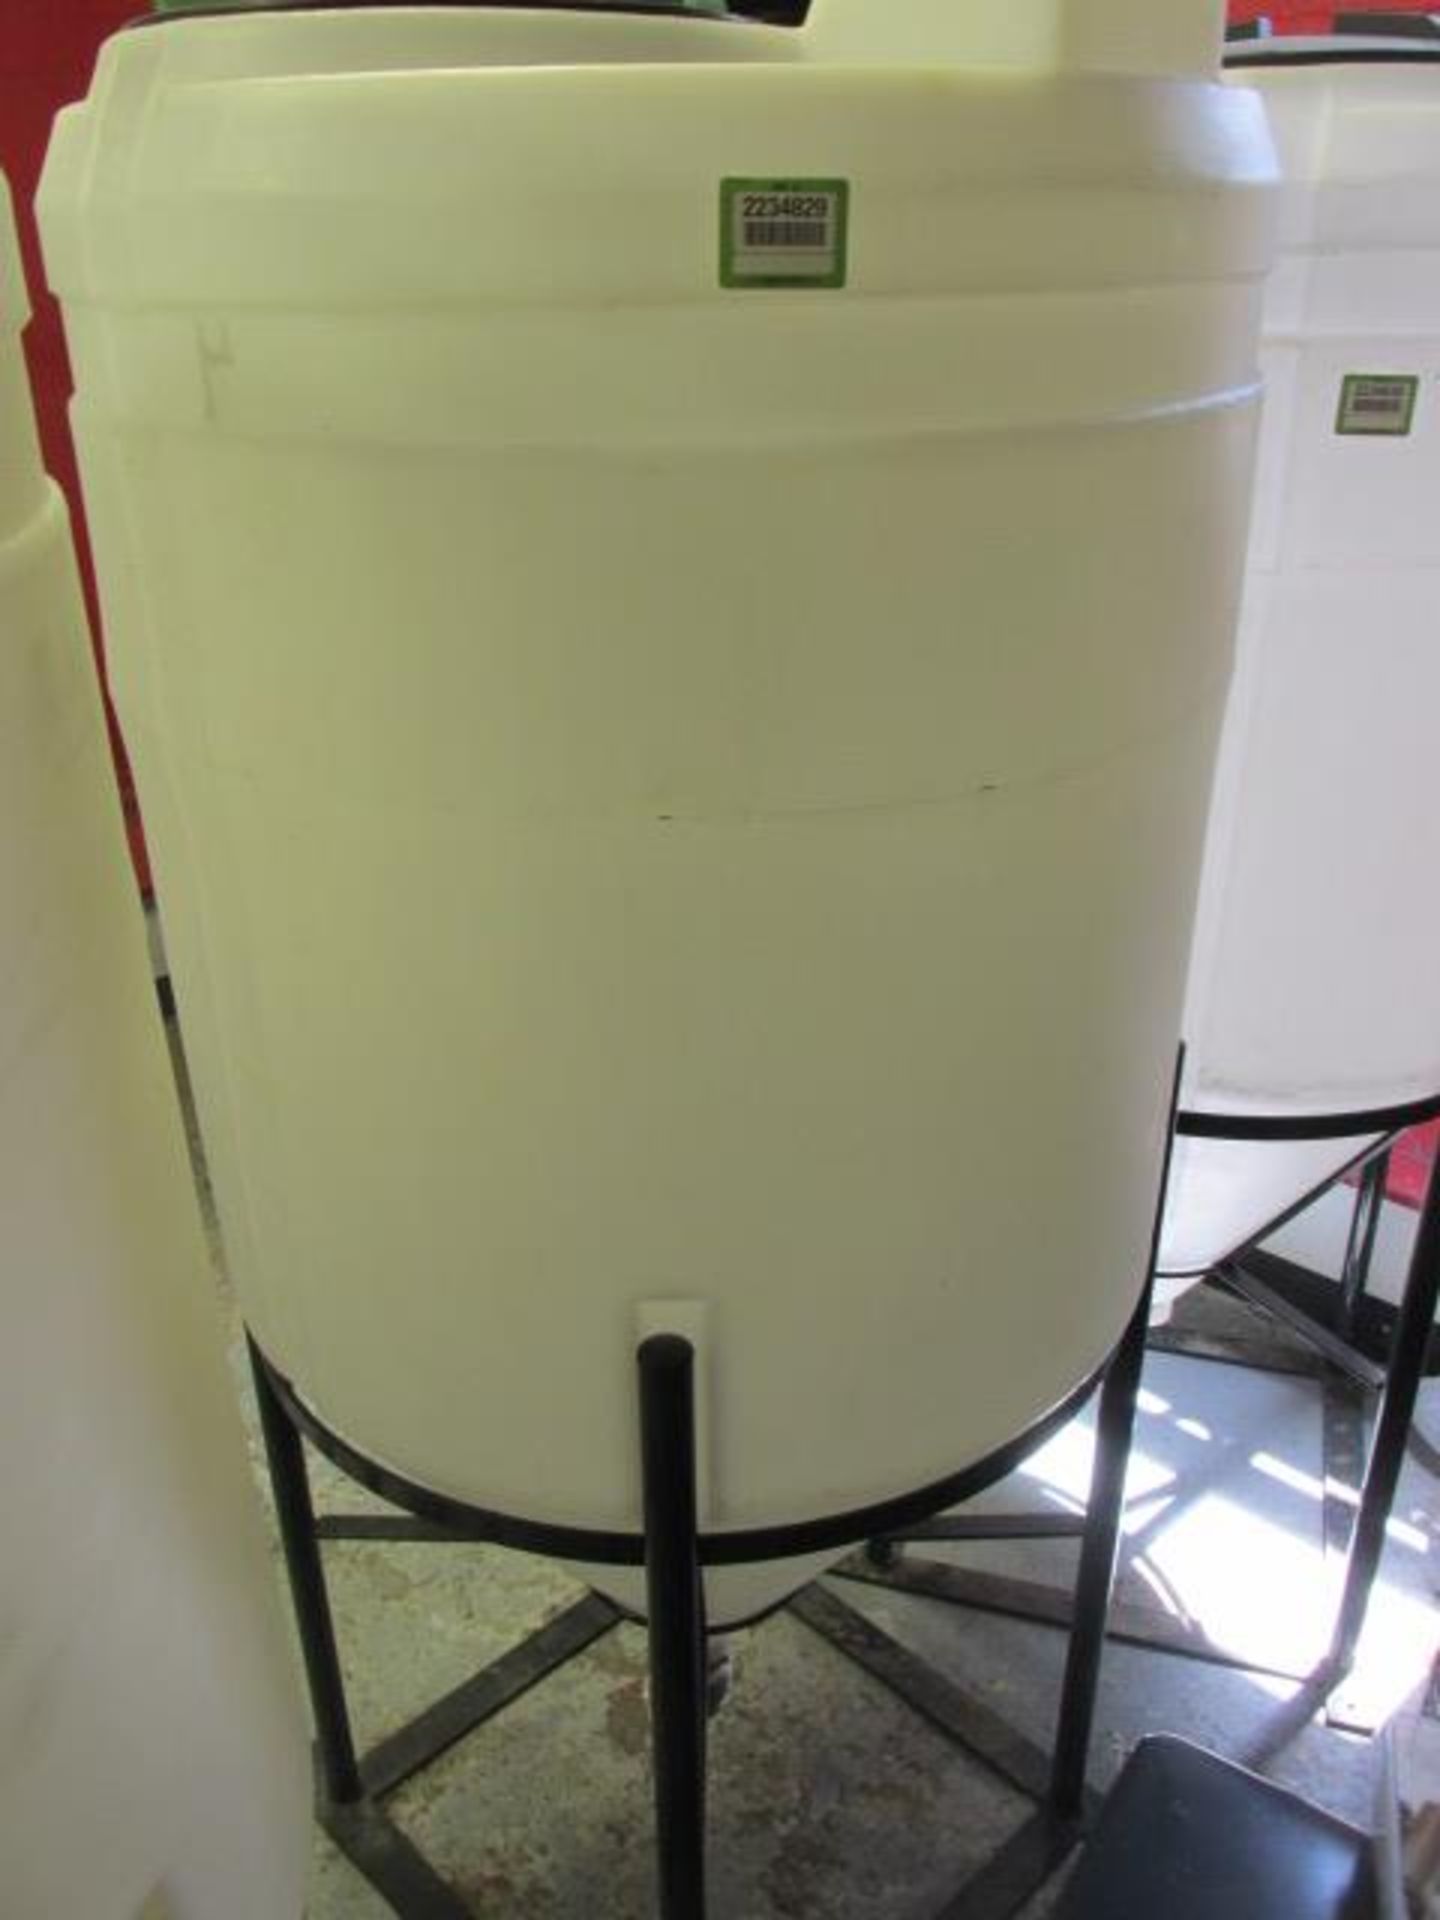 Poly Tank, 3BBL Fermenter Tank, 90 Gal. HIT# 2234829. Loc: Brewery Prep Room. Asset Located at 143 - Image 2 of 2